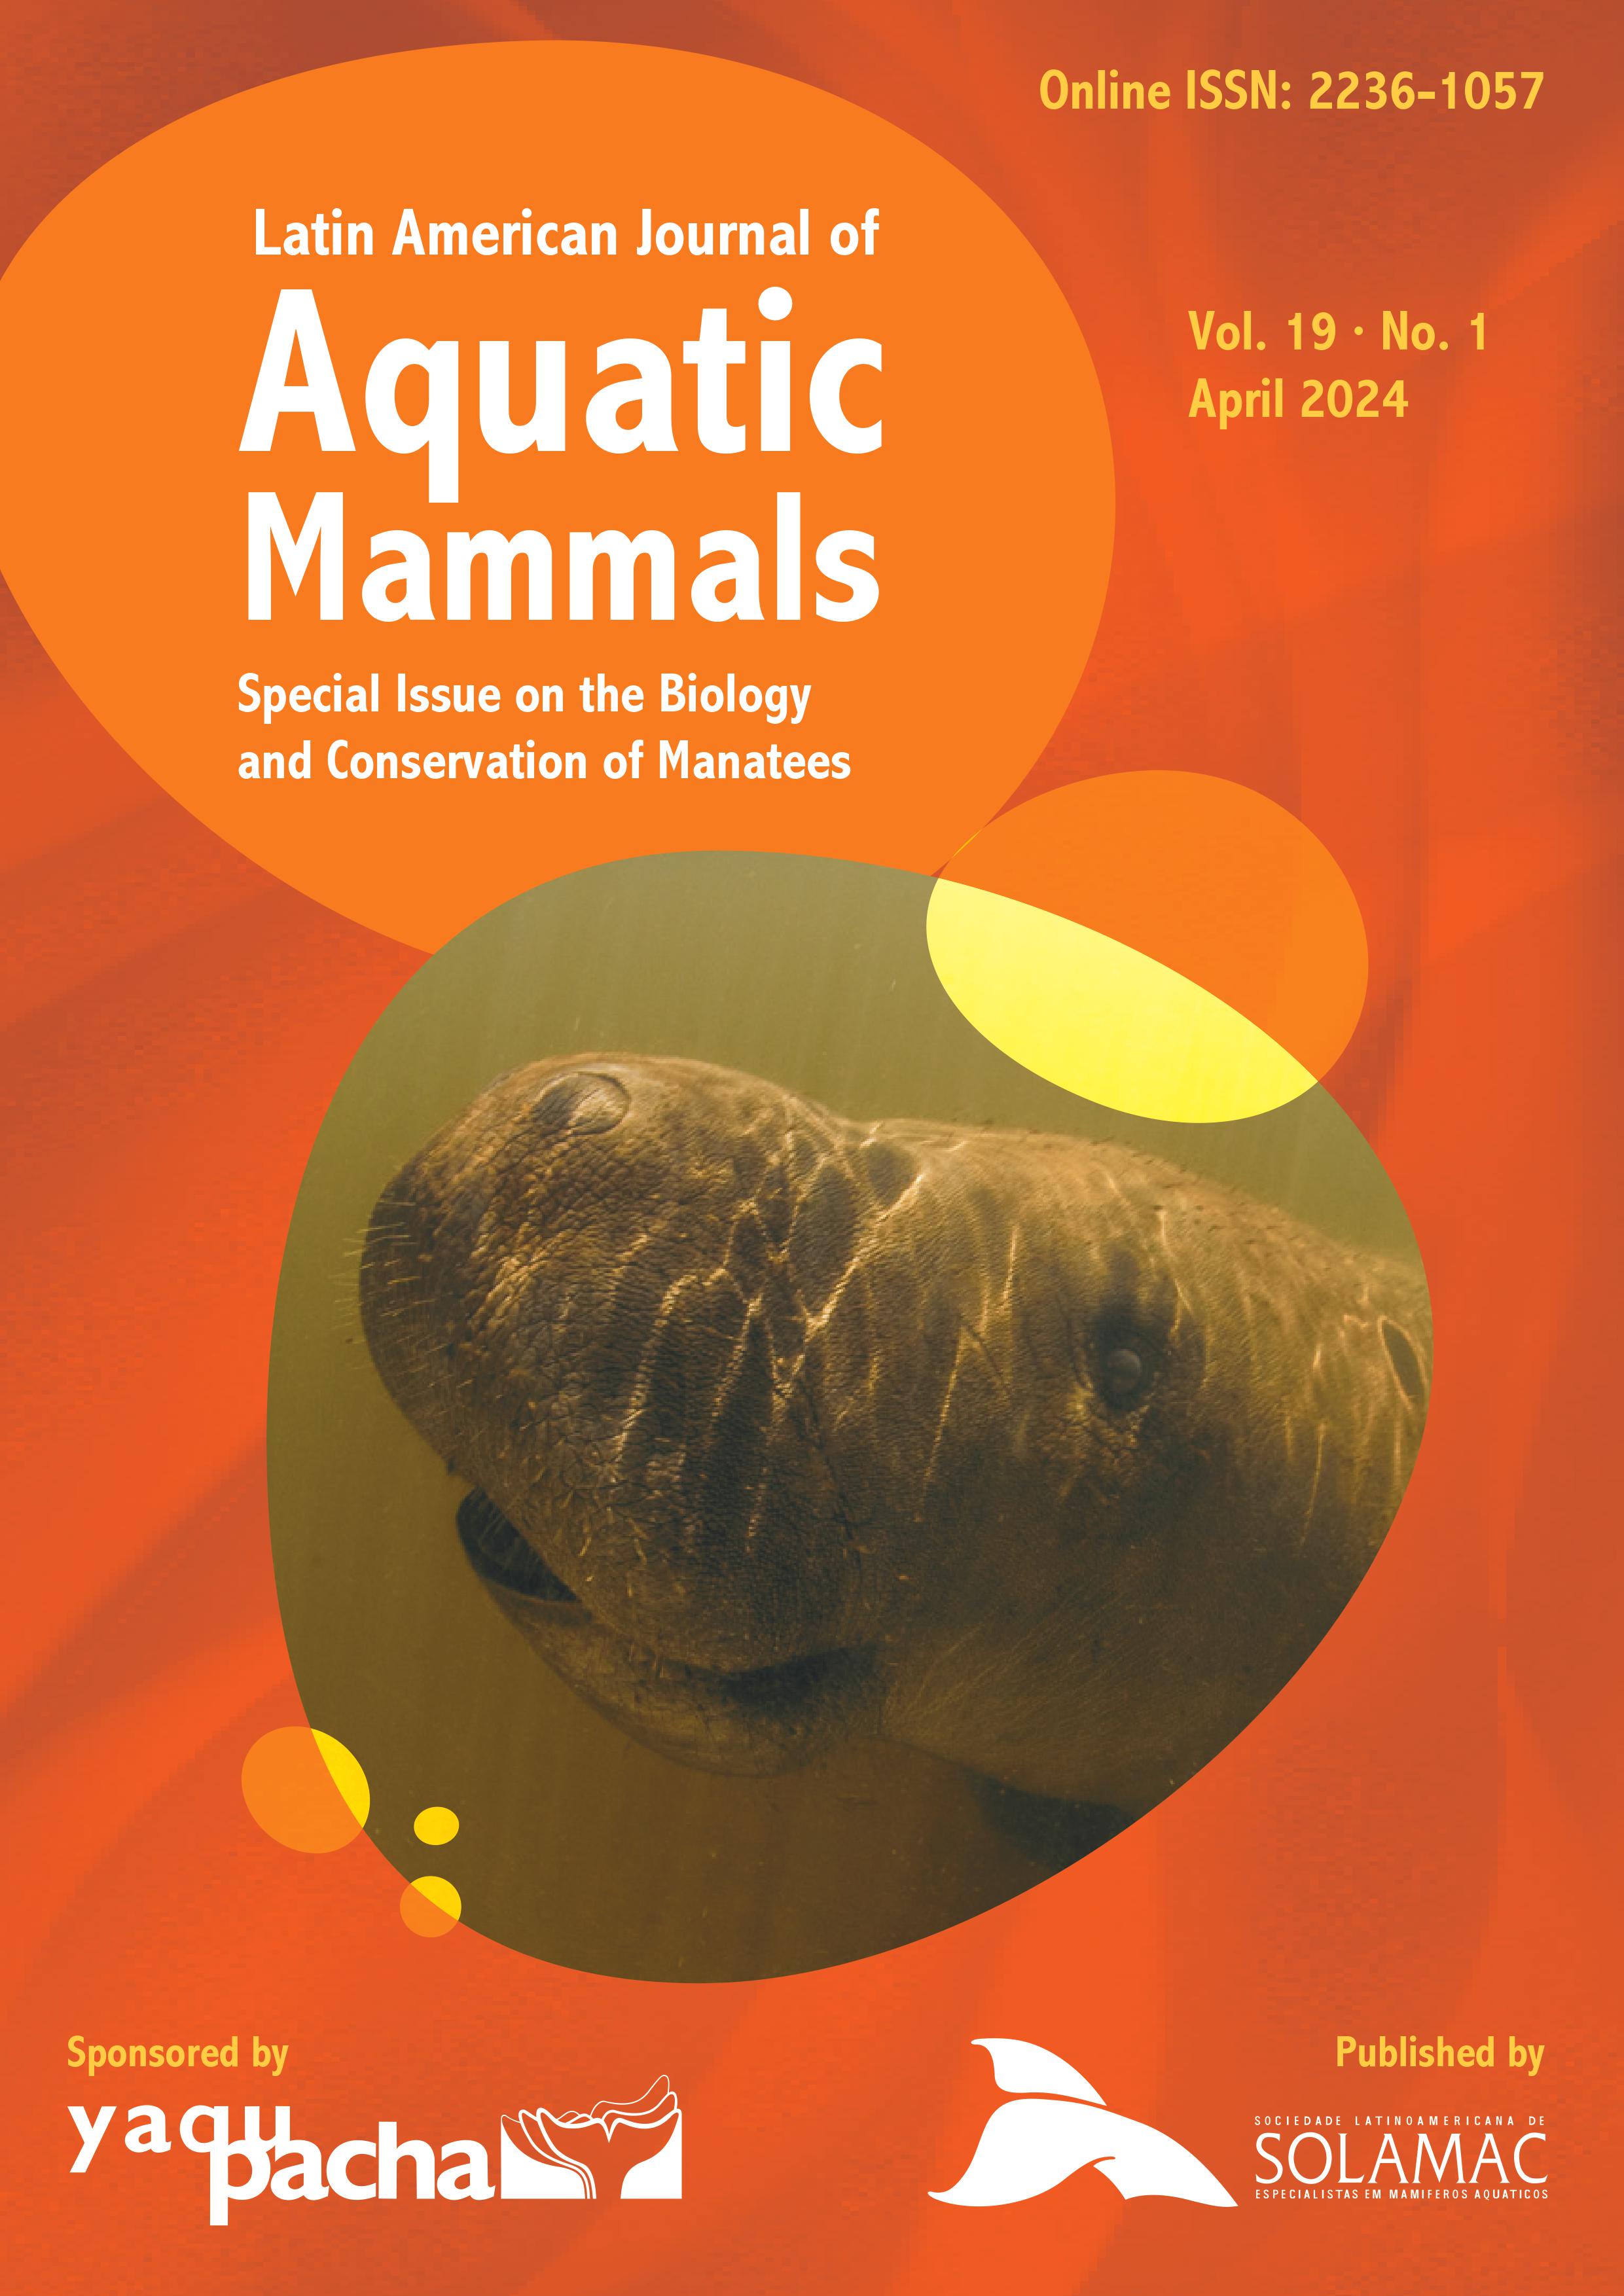 Cover of Vol. 19 No. 1 depicting the face of a West Indian manatee taken underwater in the tannin-rich waters of the Tatumunha River, Alagoas, Bazil. Photo Credit: Enrico marcovalid/FMA Collection